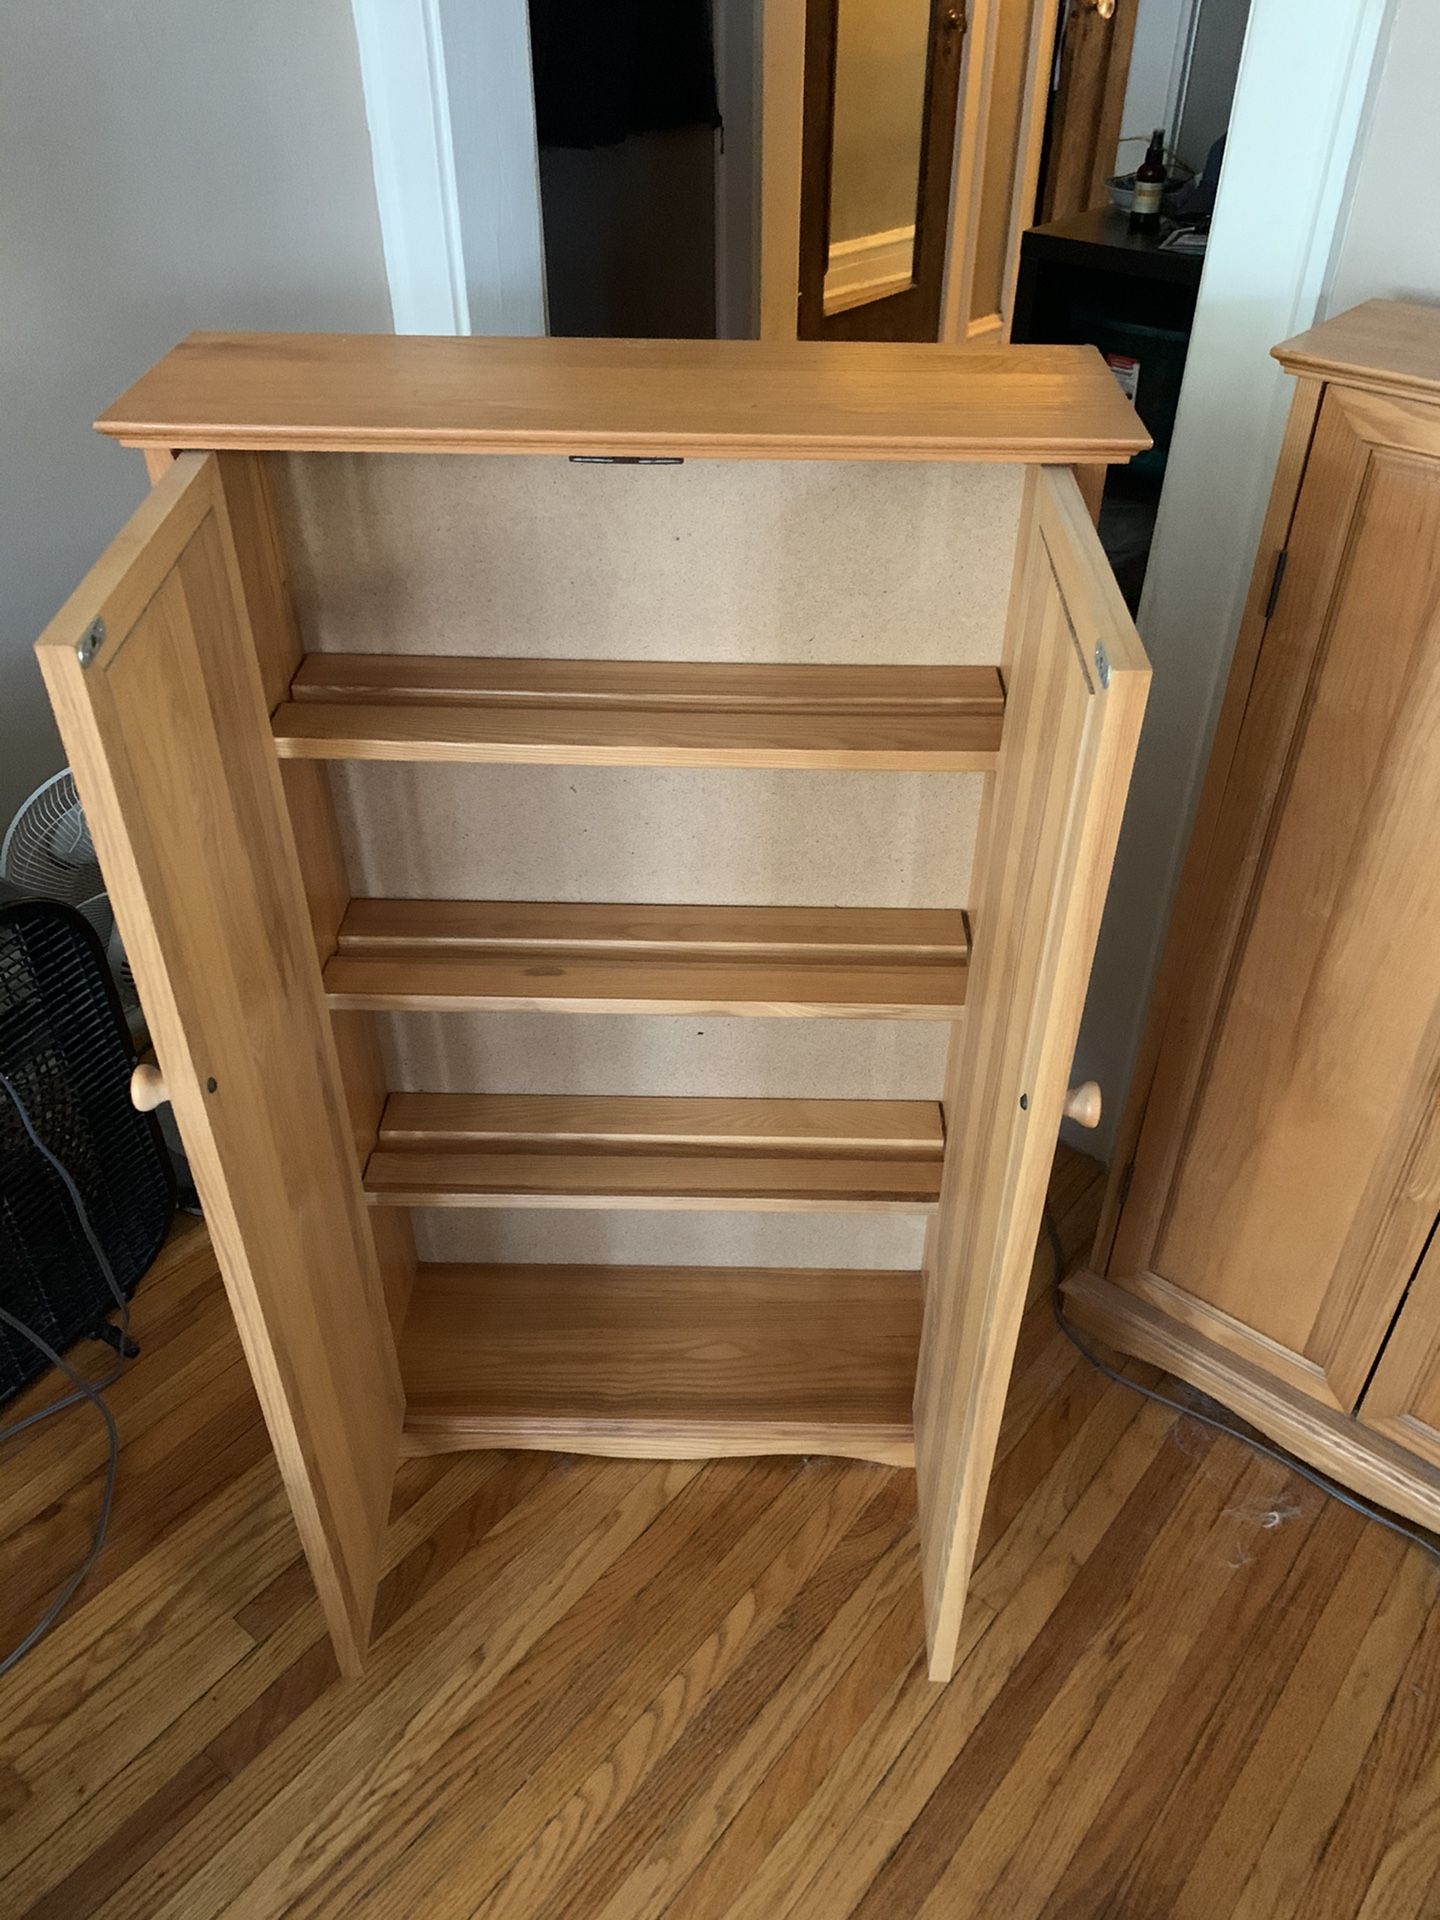 Solid wood storage cabinets $25 each 40 for both